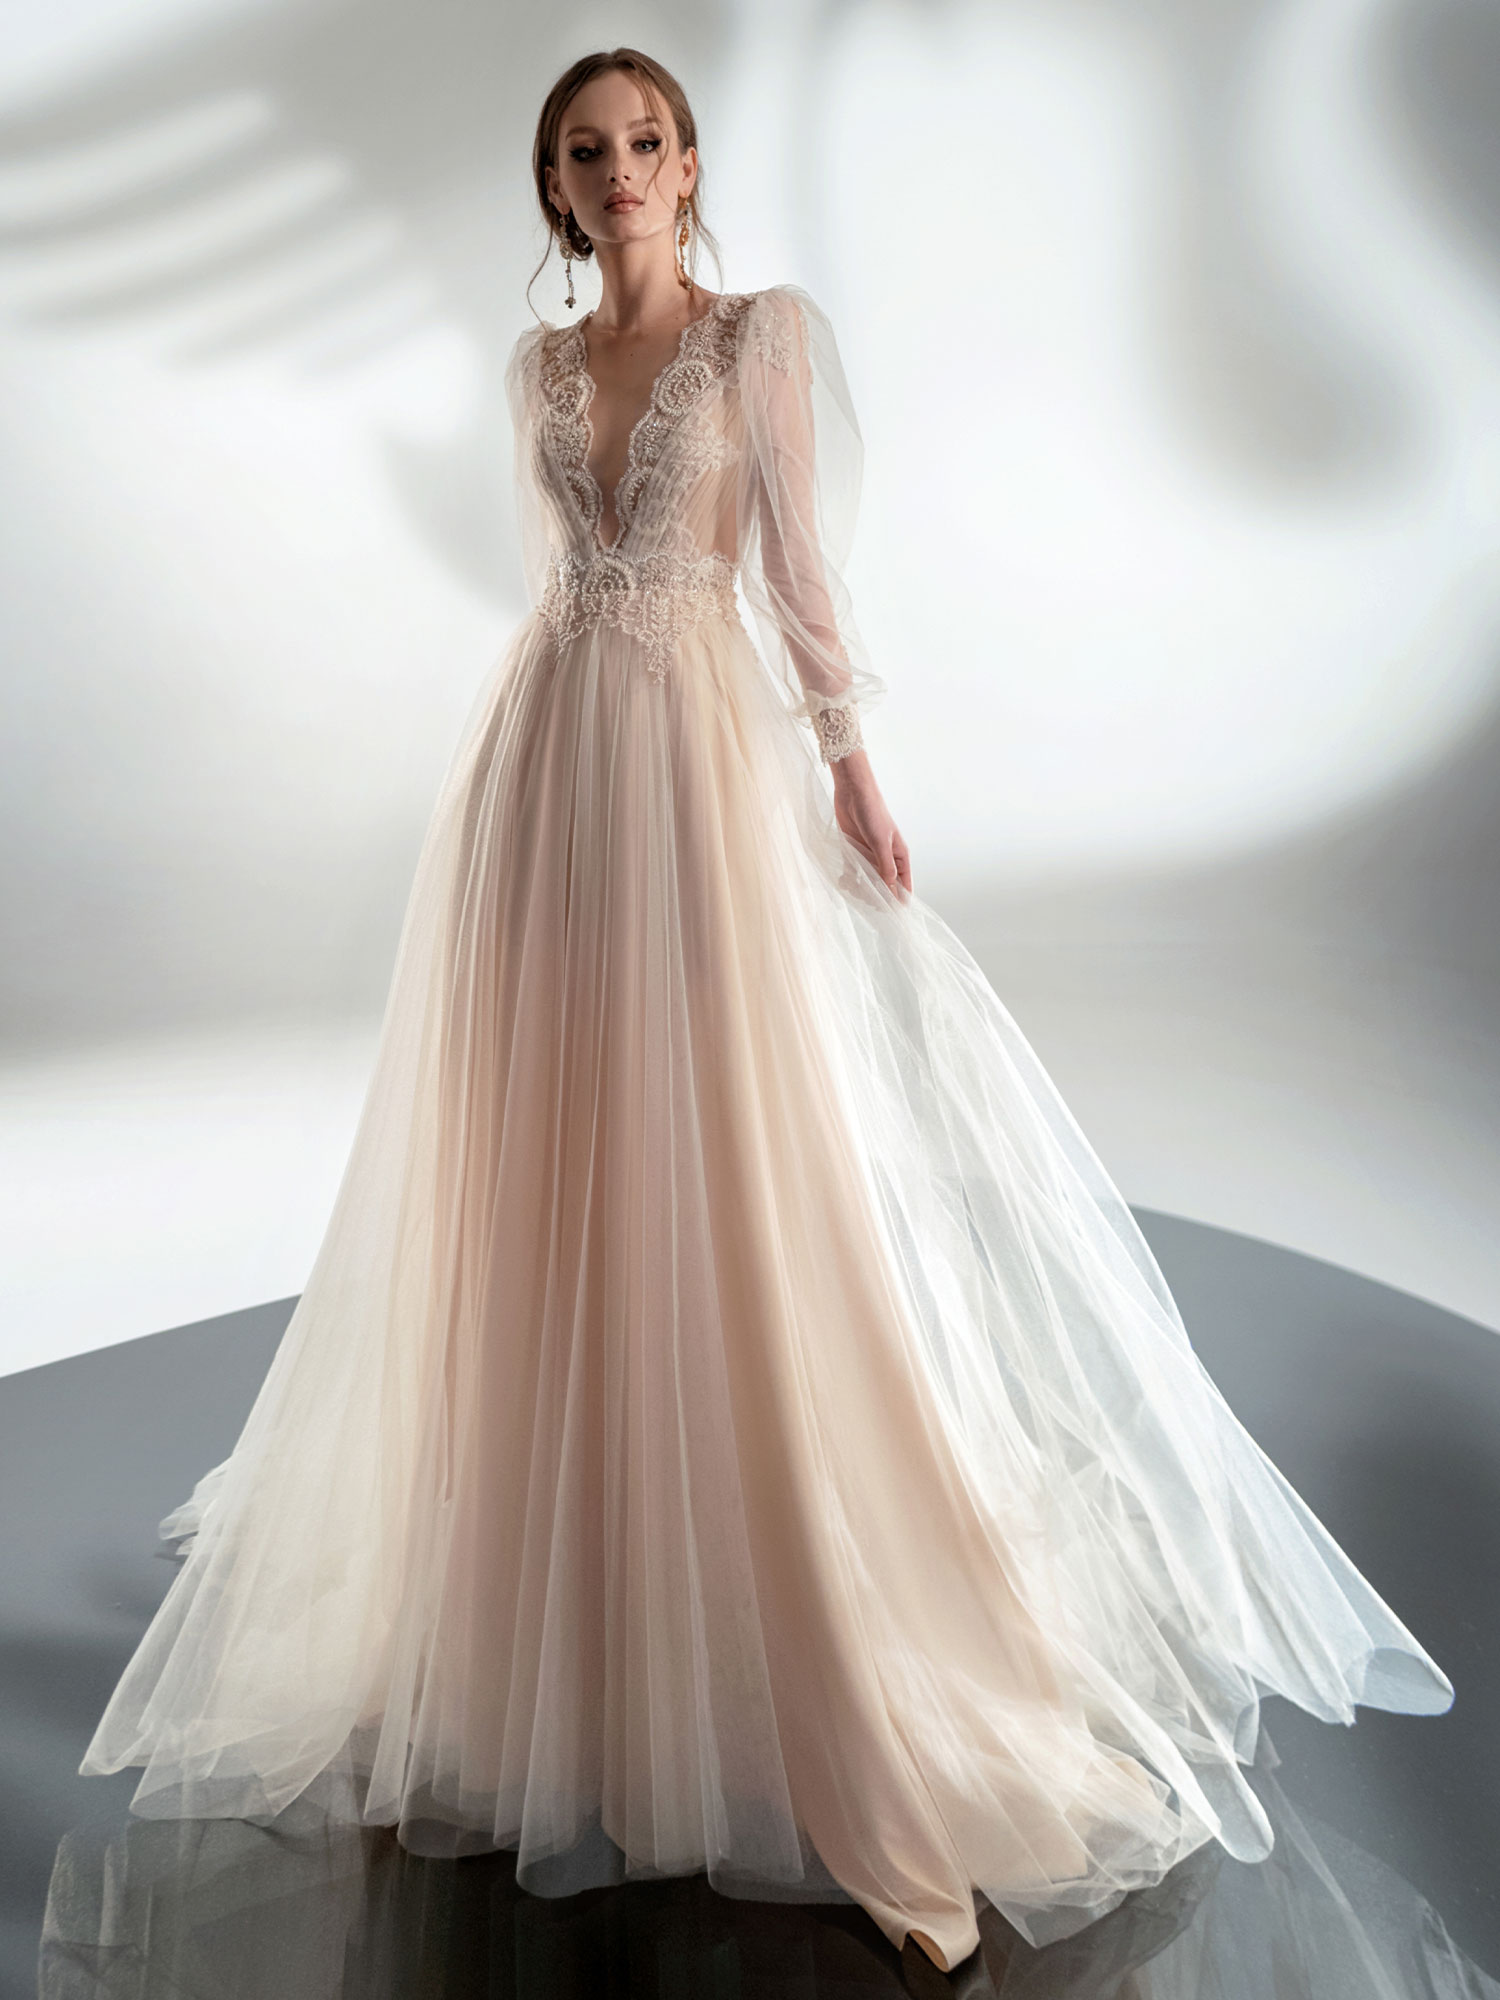 Puff sleeve A-line wedding dress with V-plunging neckline